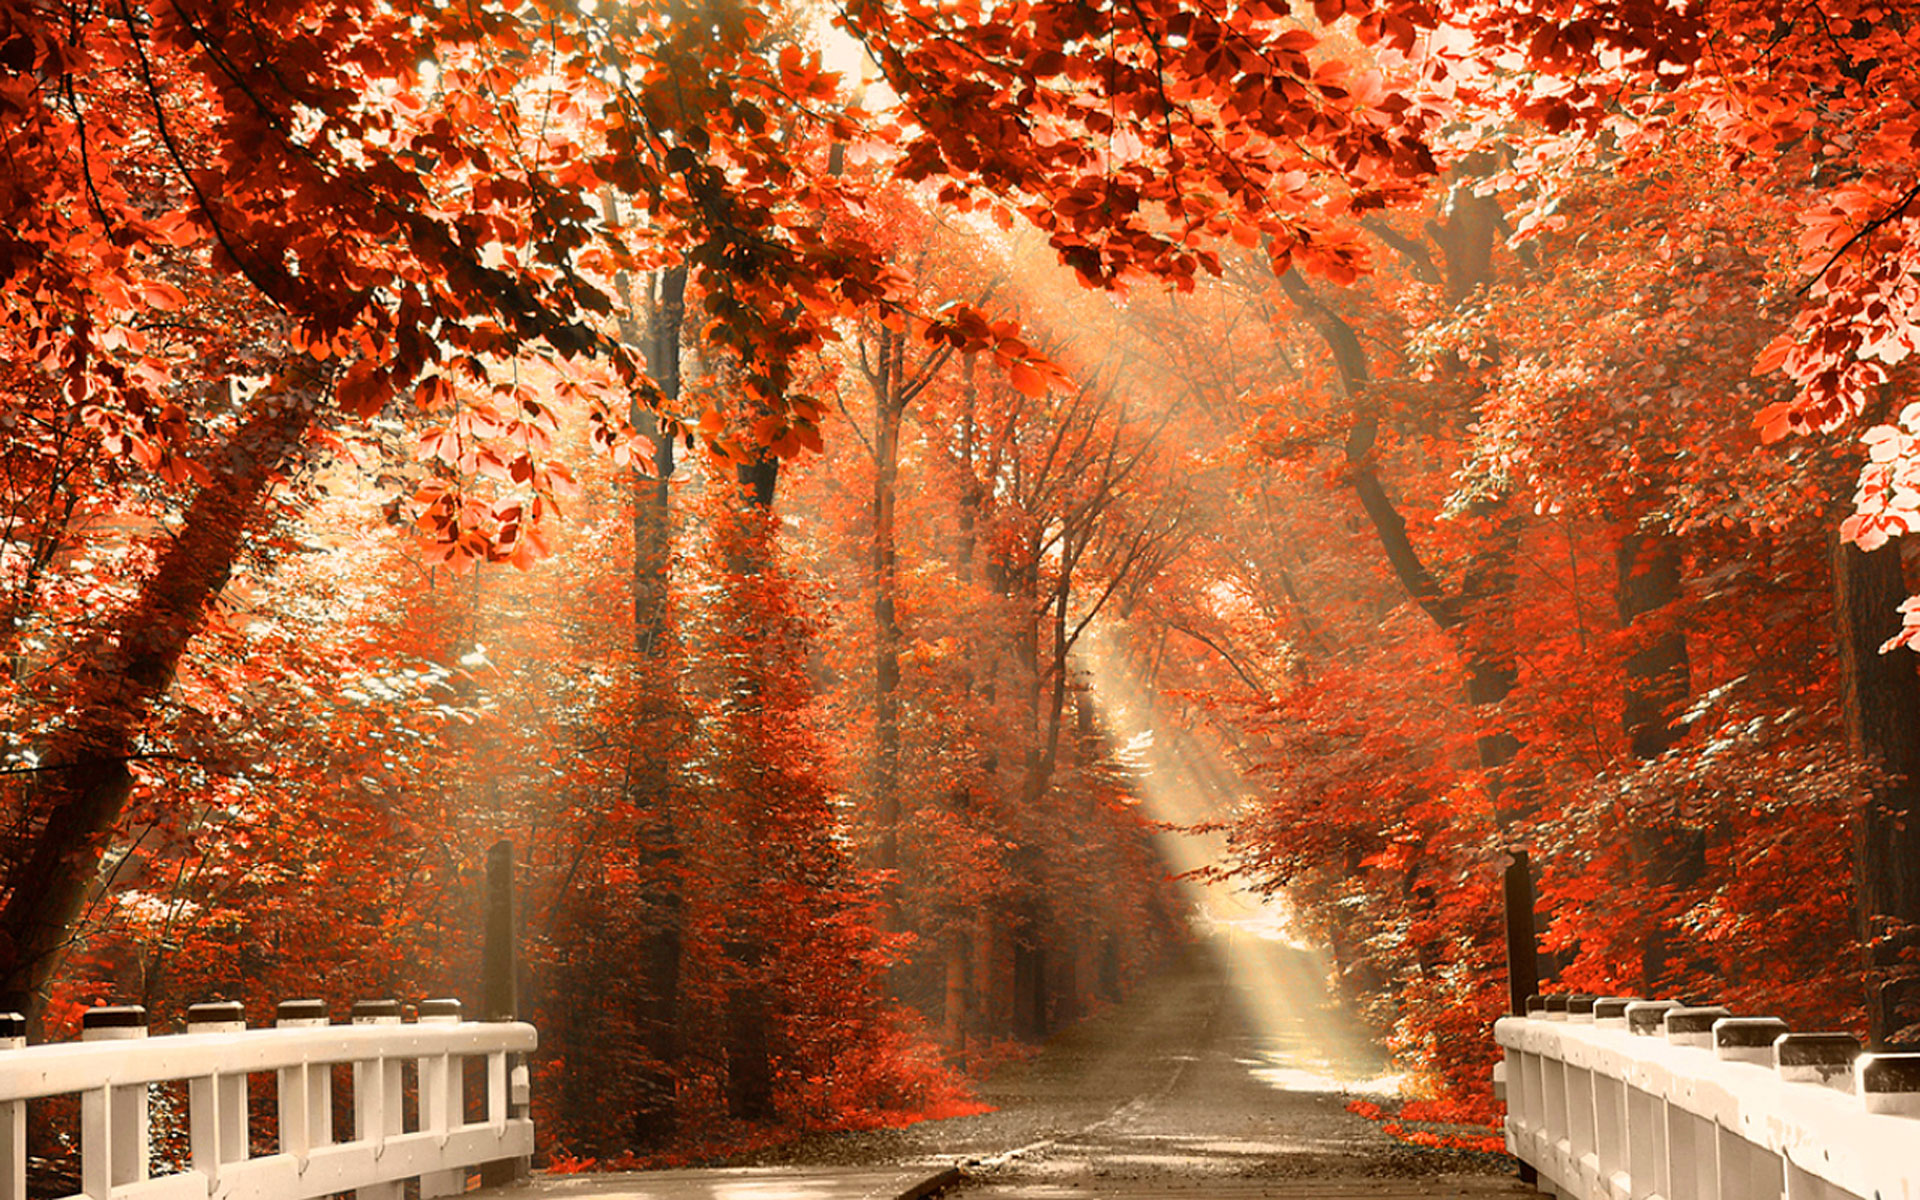 21WbVG Autumn Wallpaper Examples for Your Desktop Background